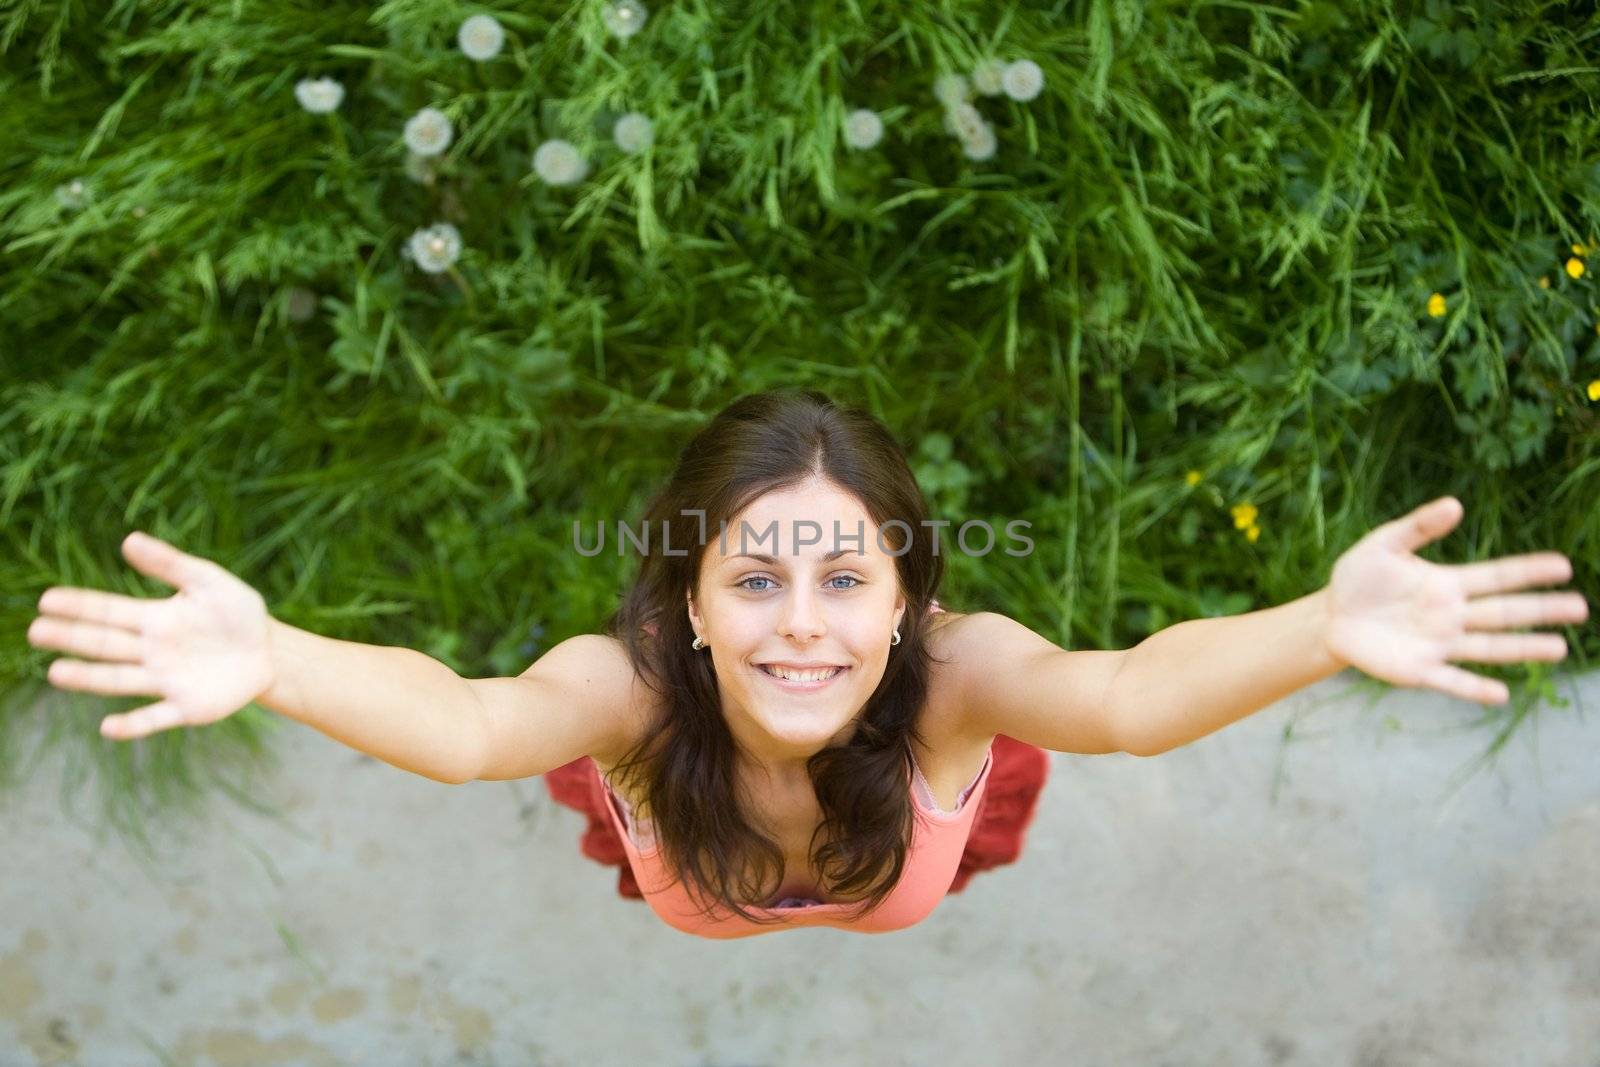 The girl with a happy smile on a green grass 
